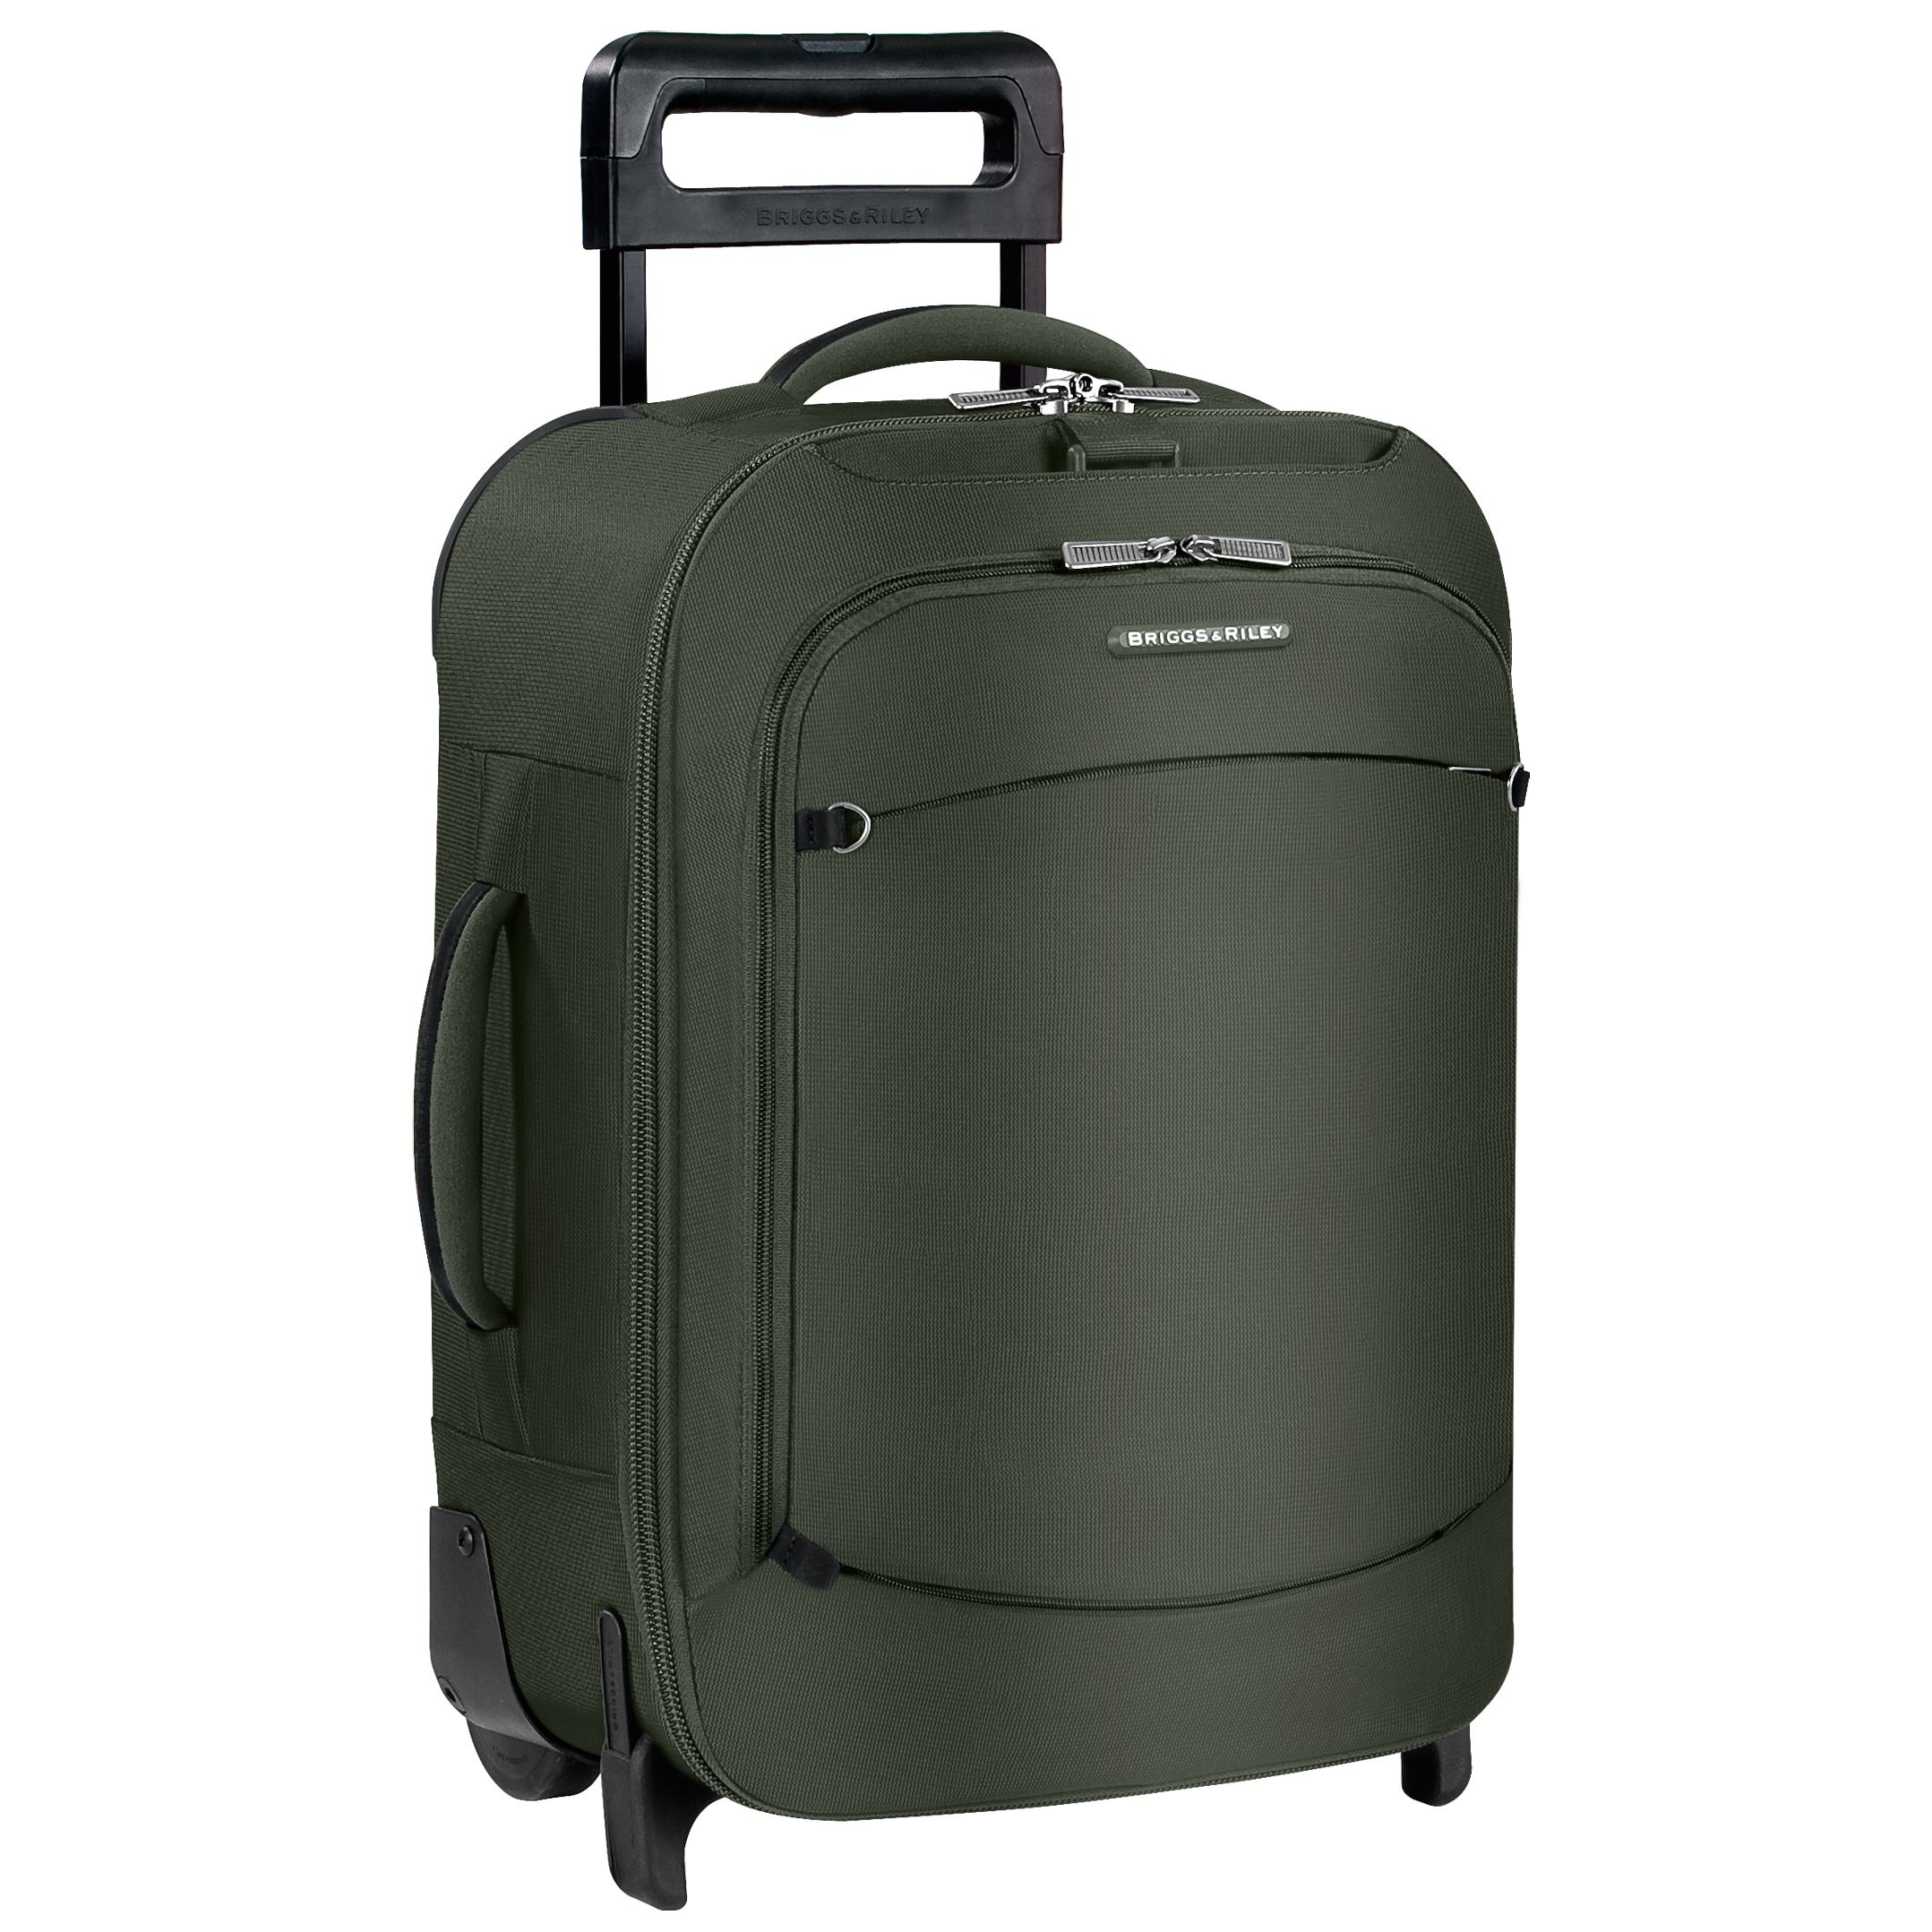 Briggs & Riley Wheeled Upright Carry-On Bag, Rainforest at John Lewis